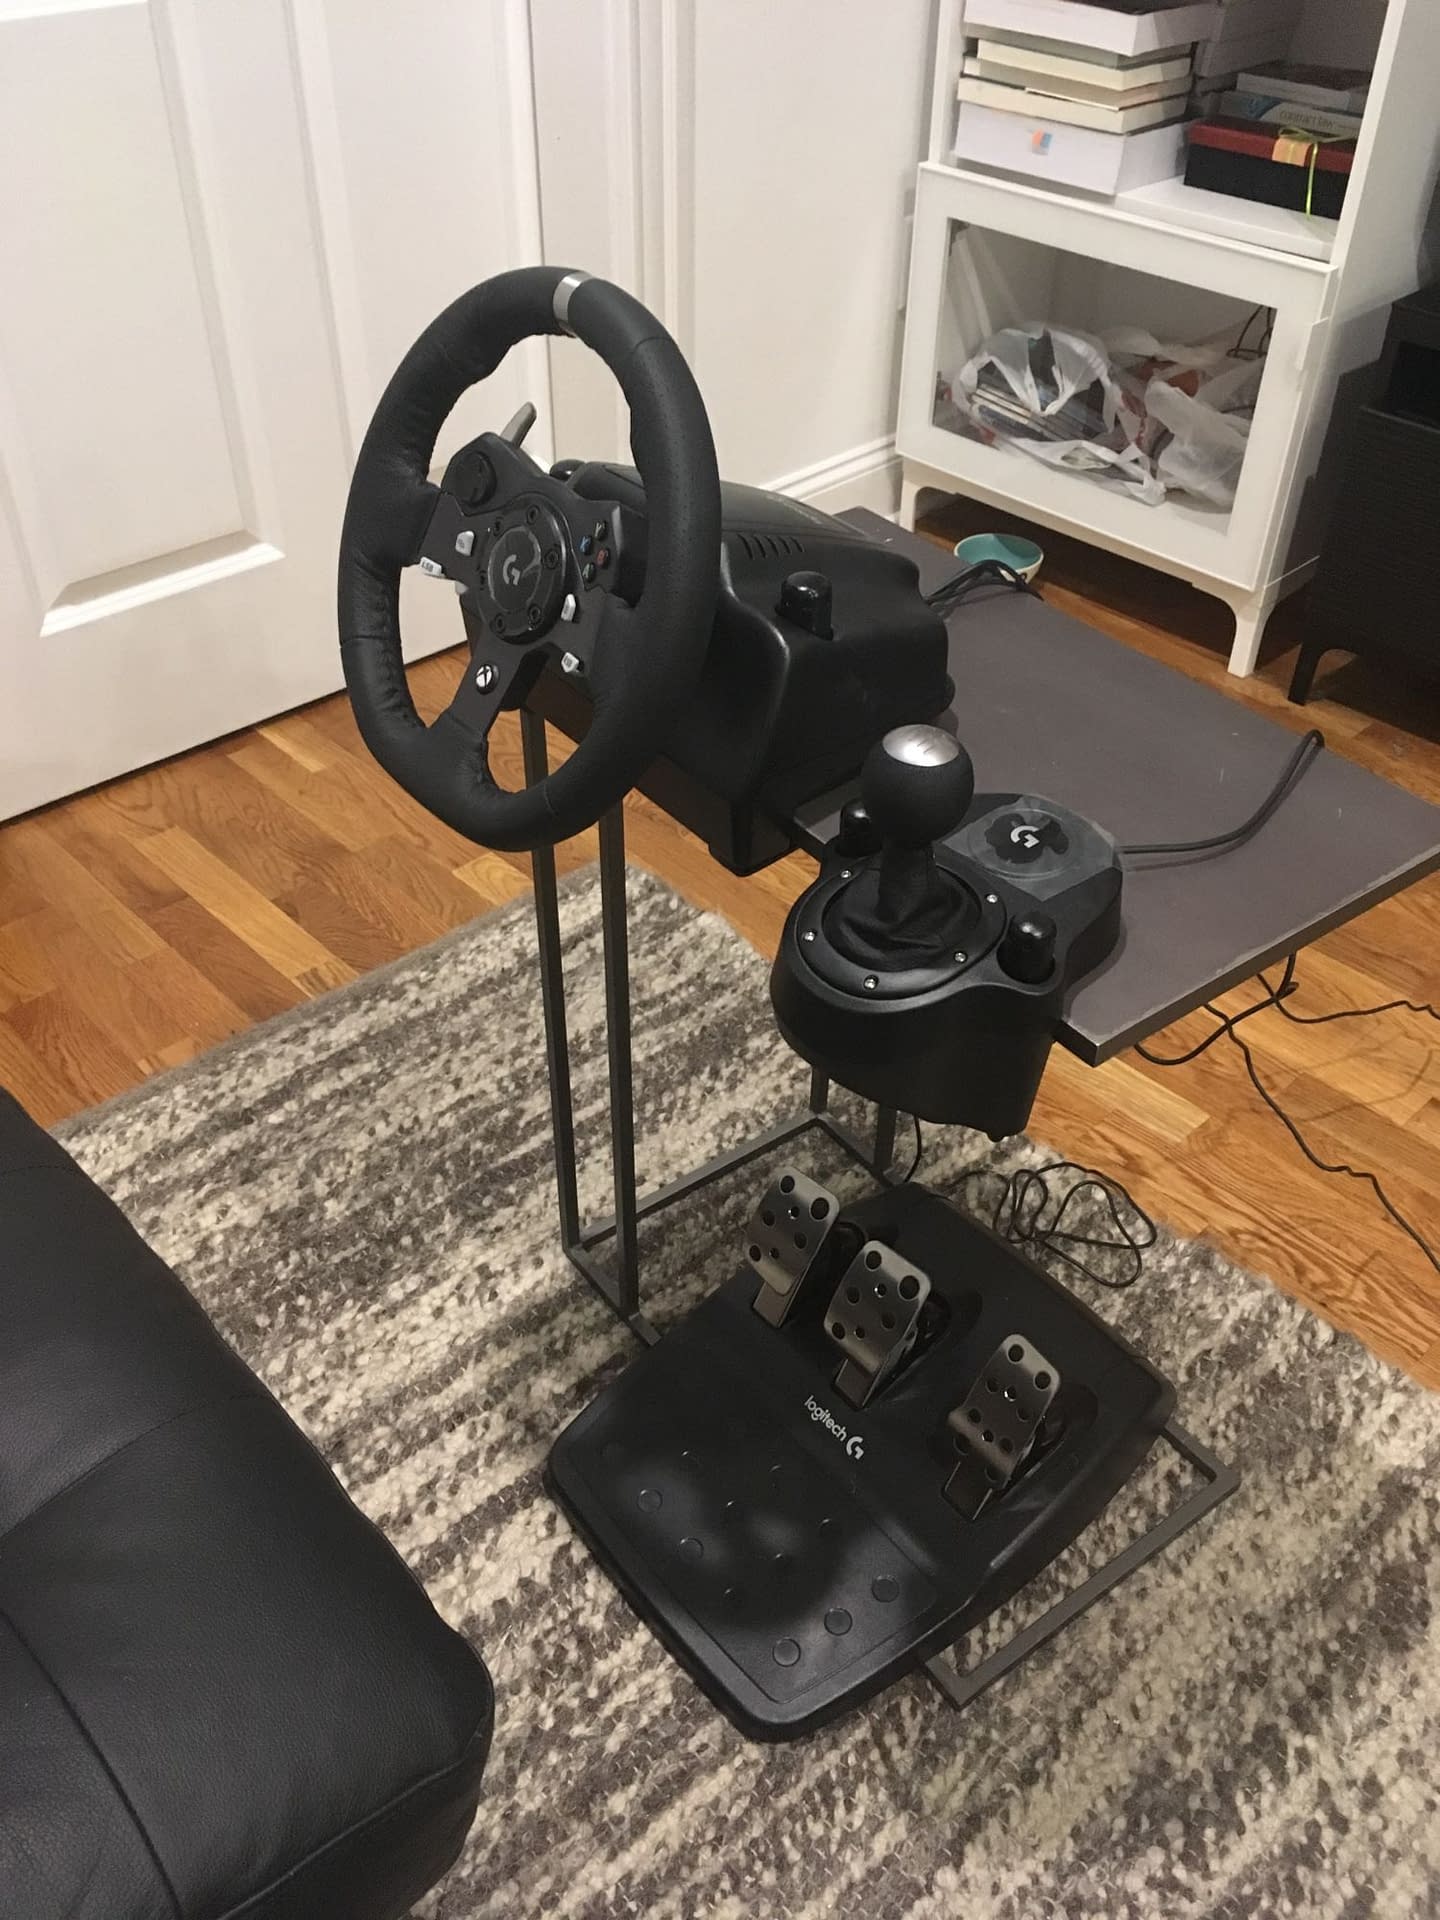 Logitech Driving Force G29 Racing Wheel with Pedals And Shifter at